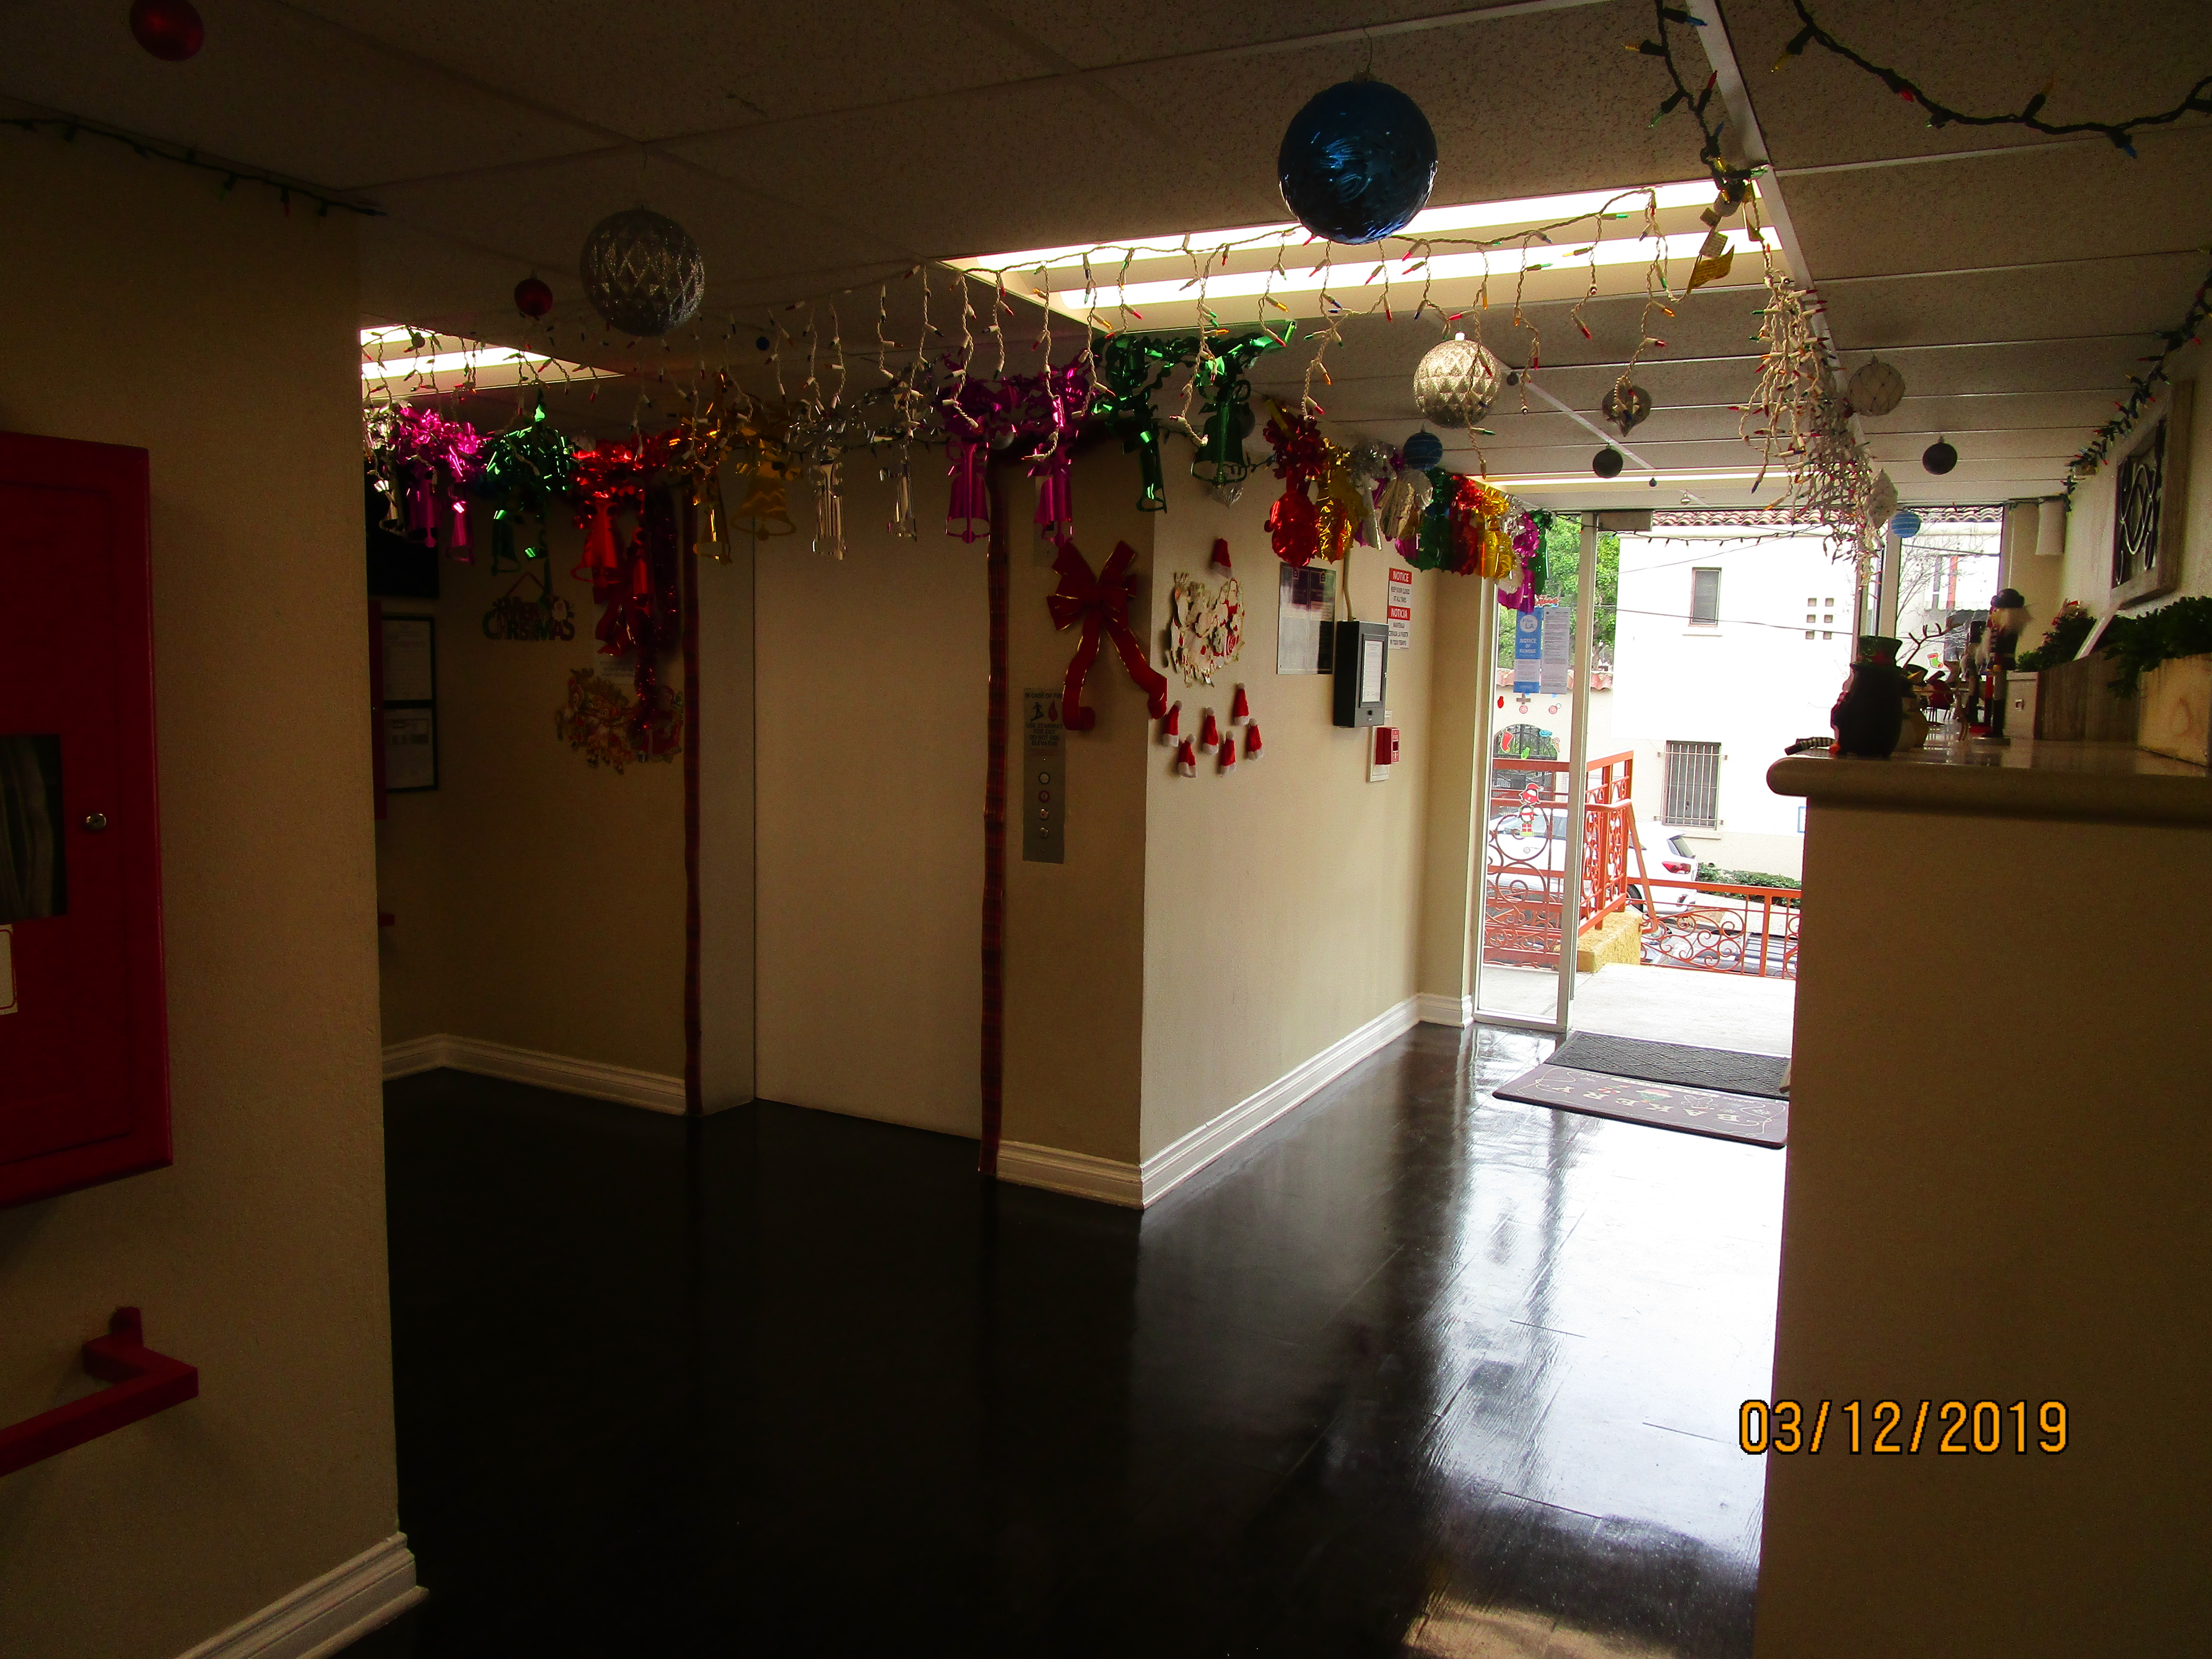 View of a room full of decorations hanging from the ceiling, entrance/Exit carpet in front of the door.